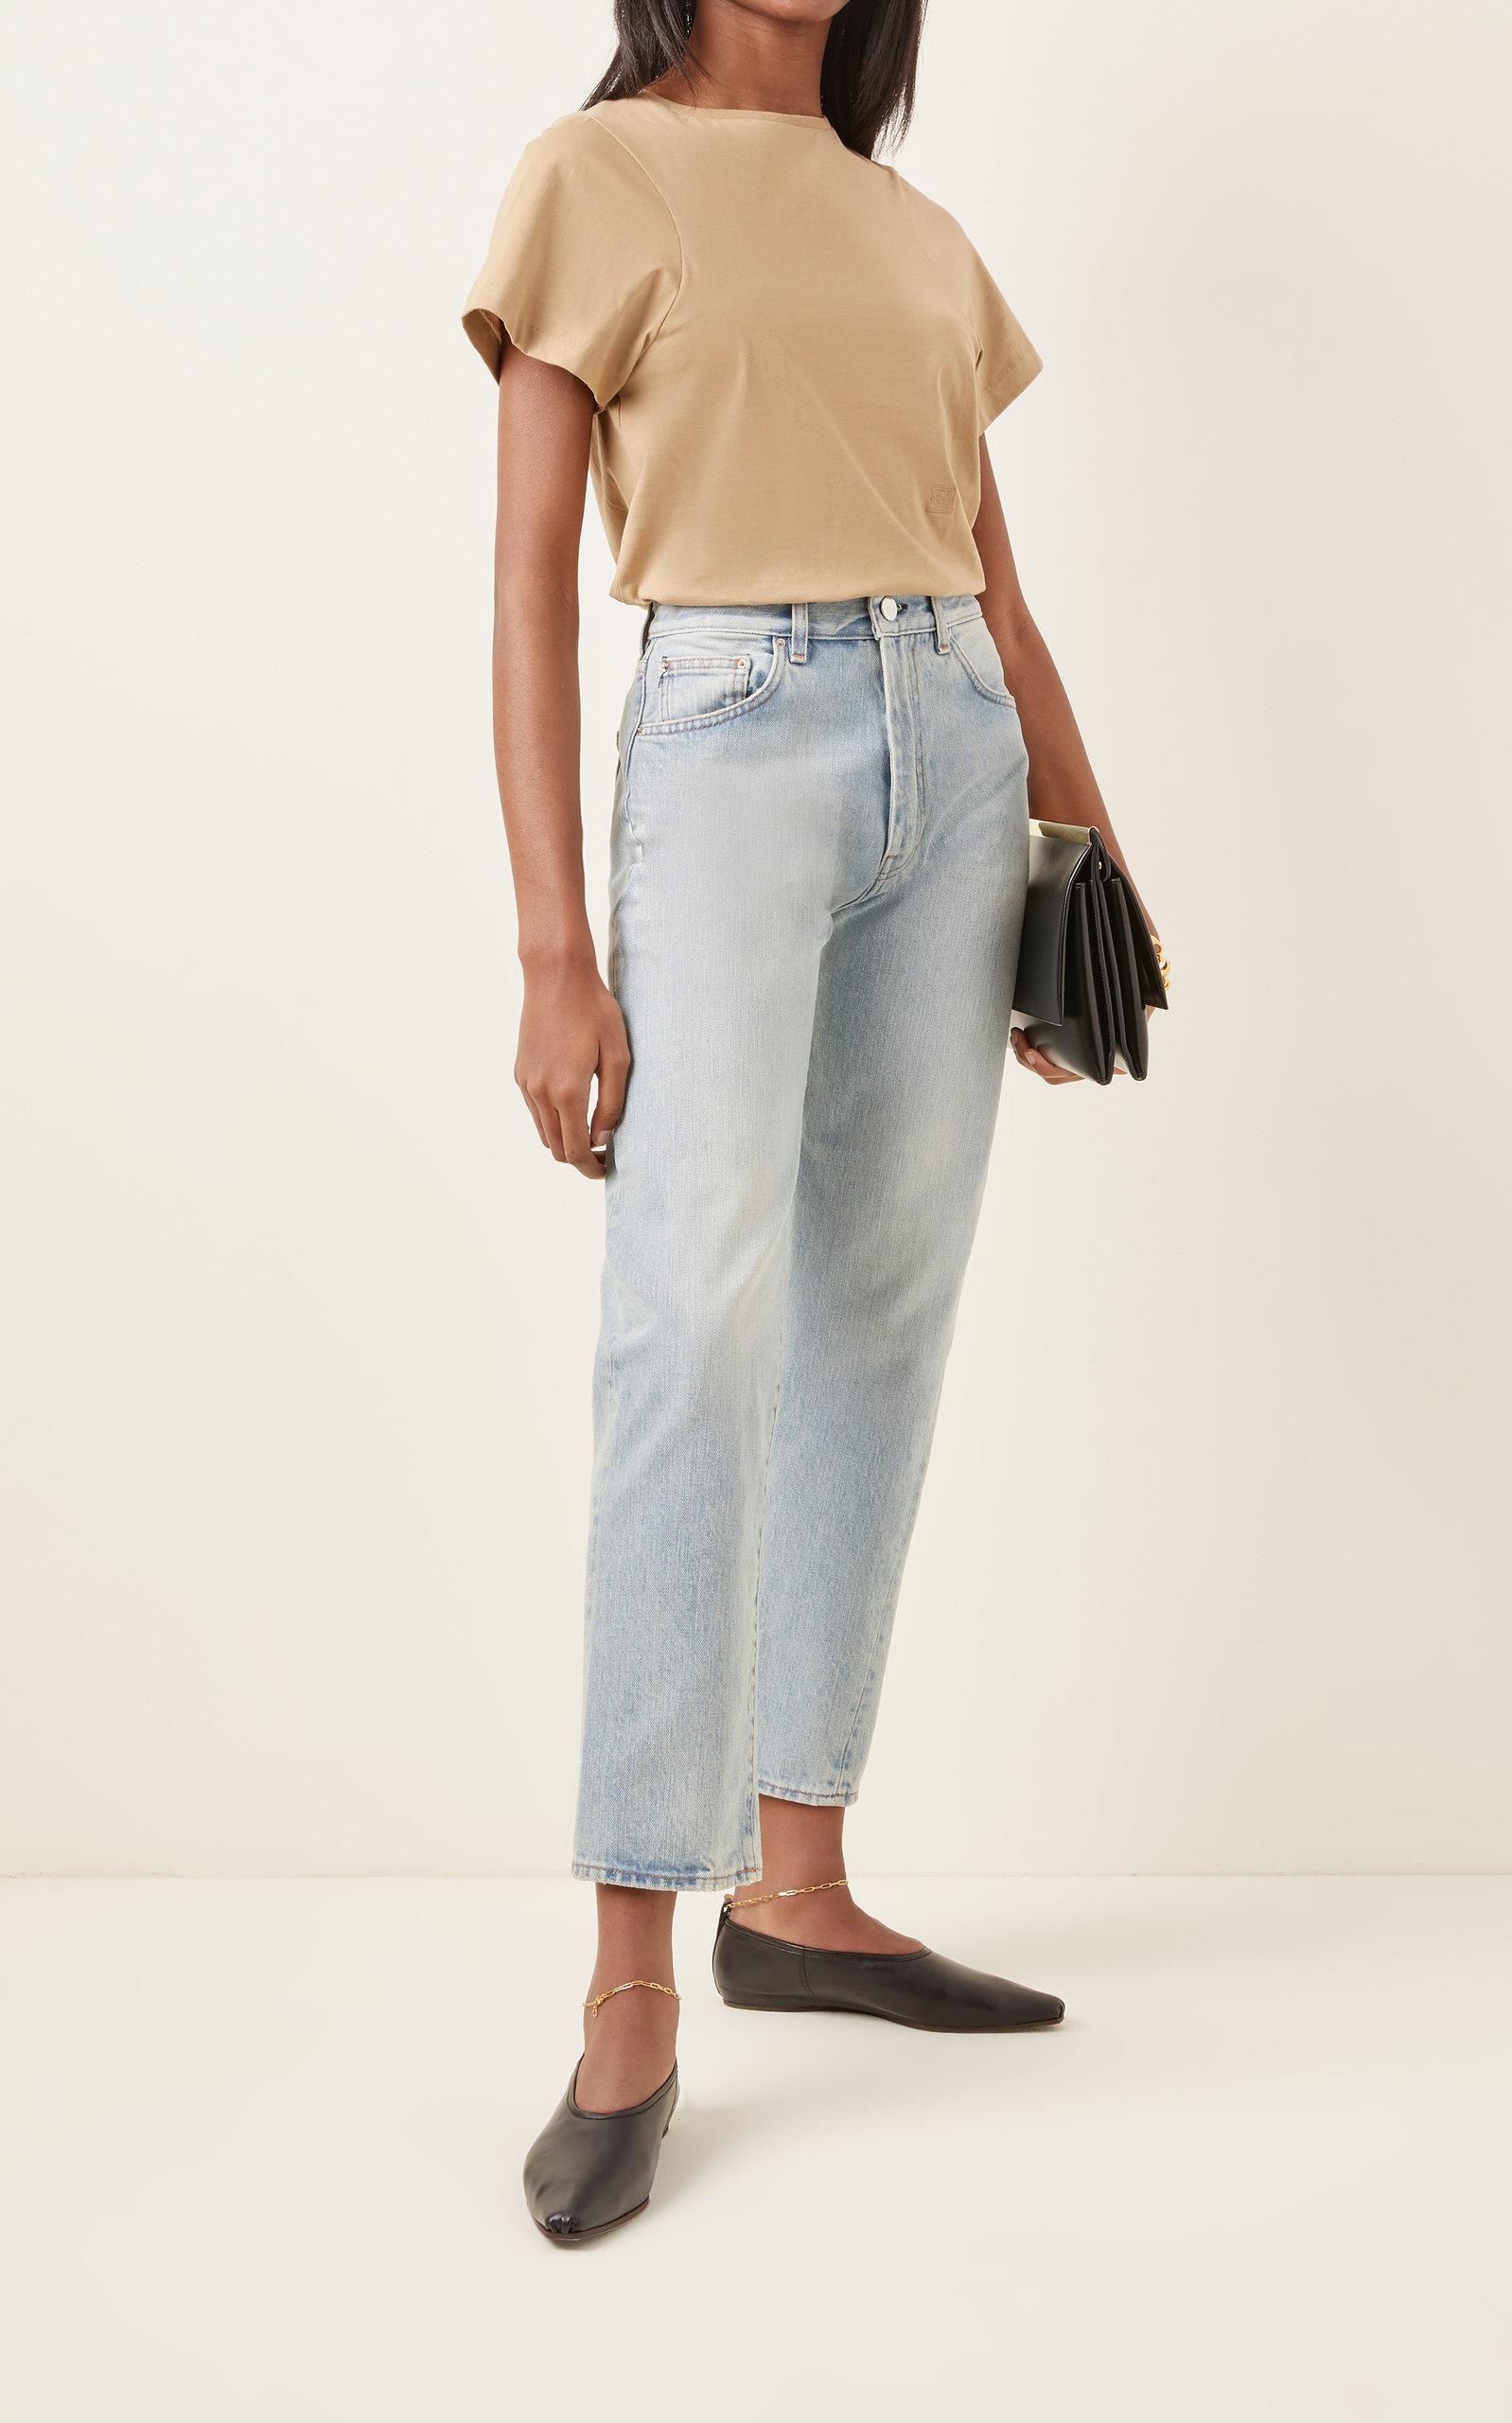 Toteme Twisted Seam Jeans